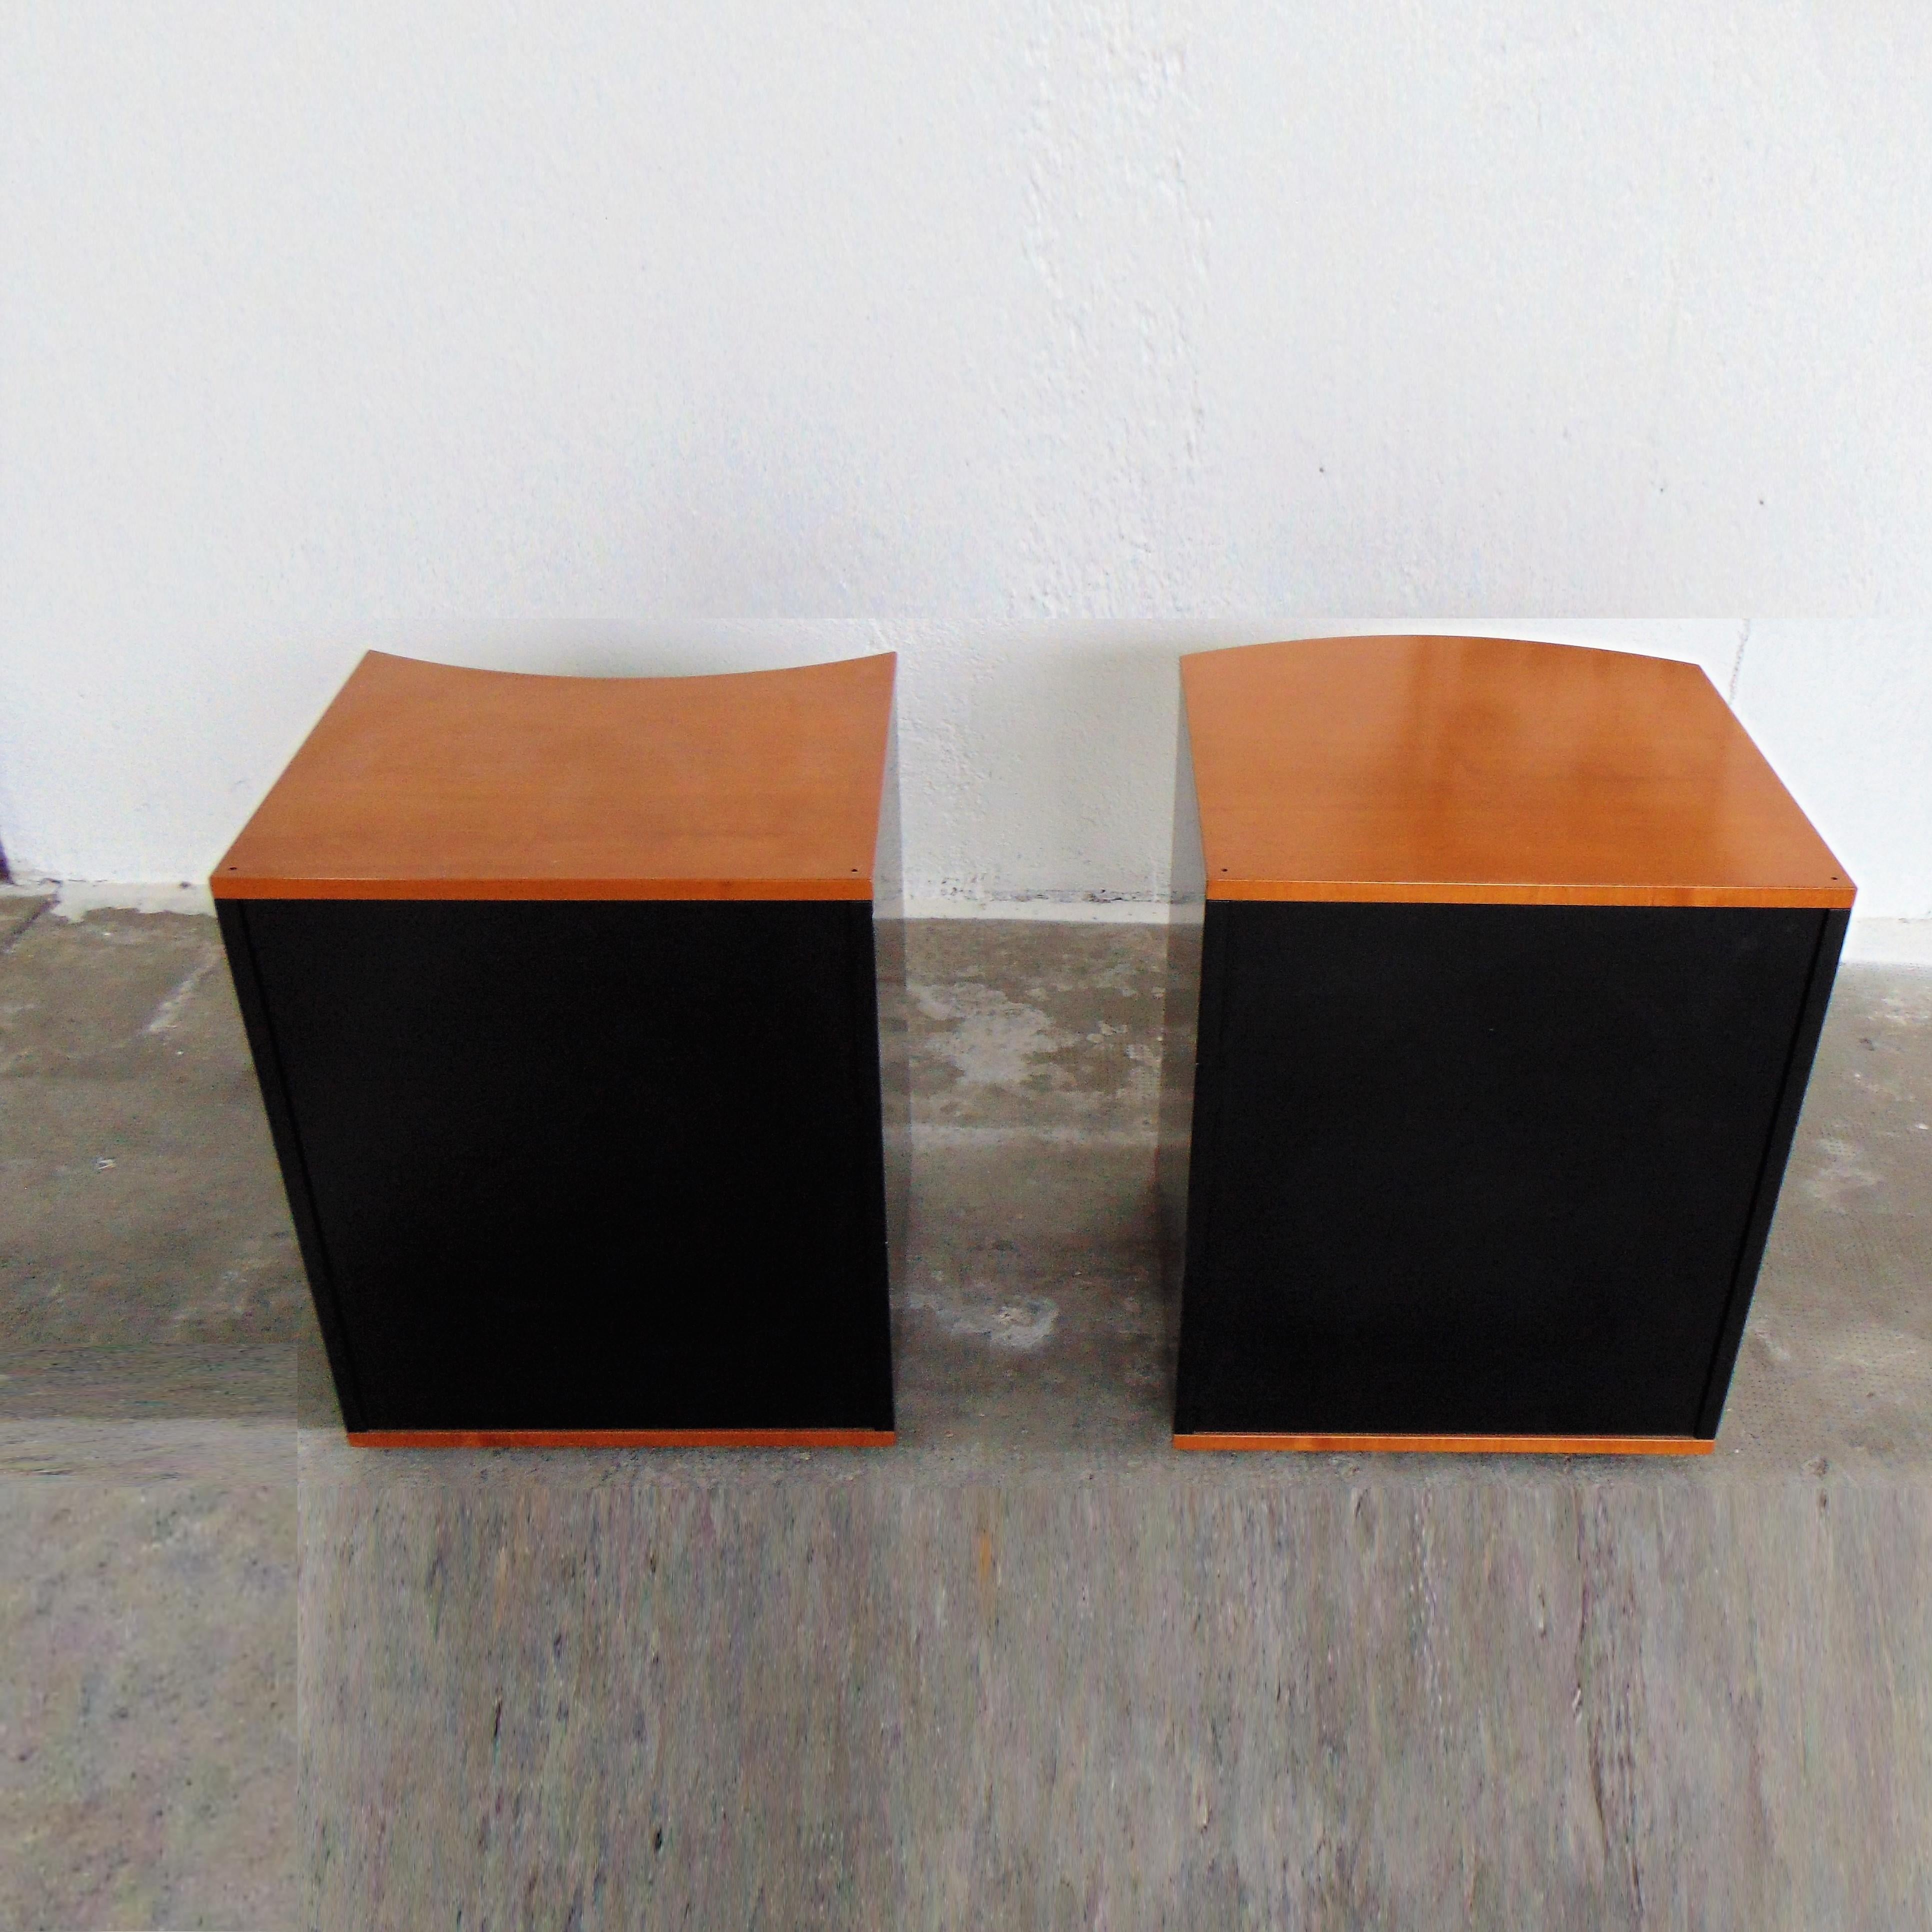 1990s Set of 2 Nightstands Walnut Stained Cherry and Black Lacquer, Roche Bobois For Sale 4